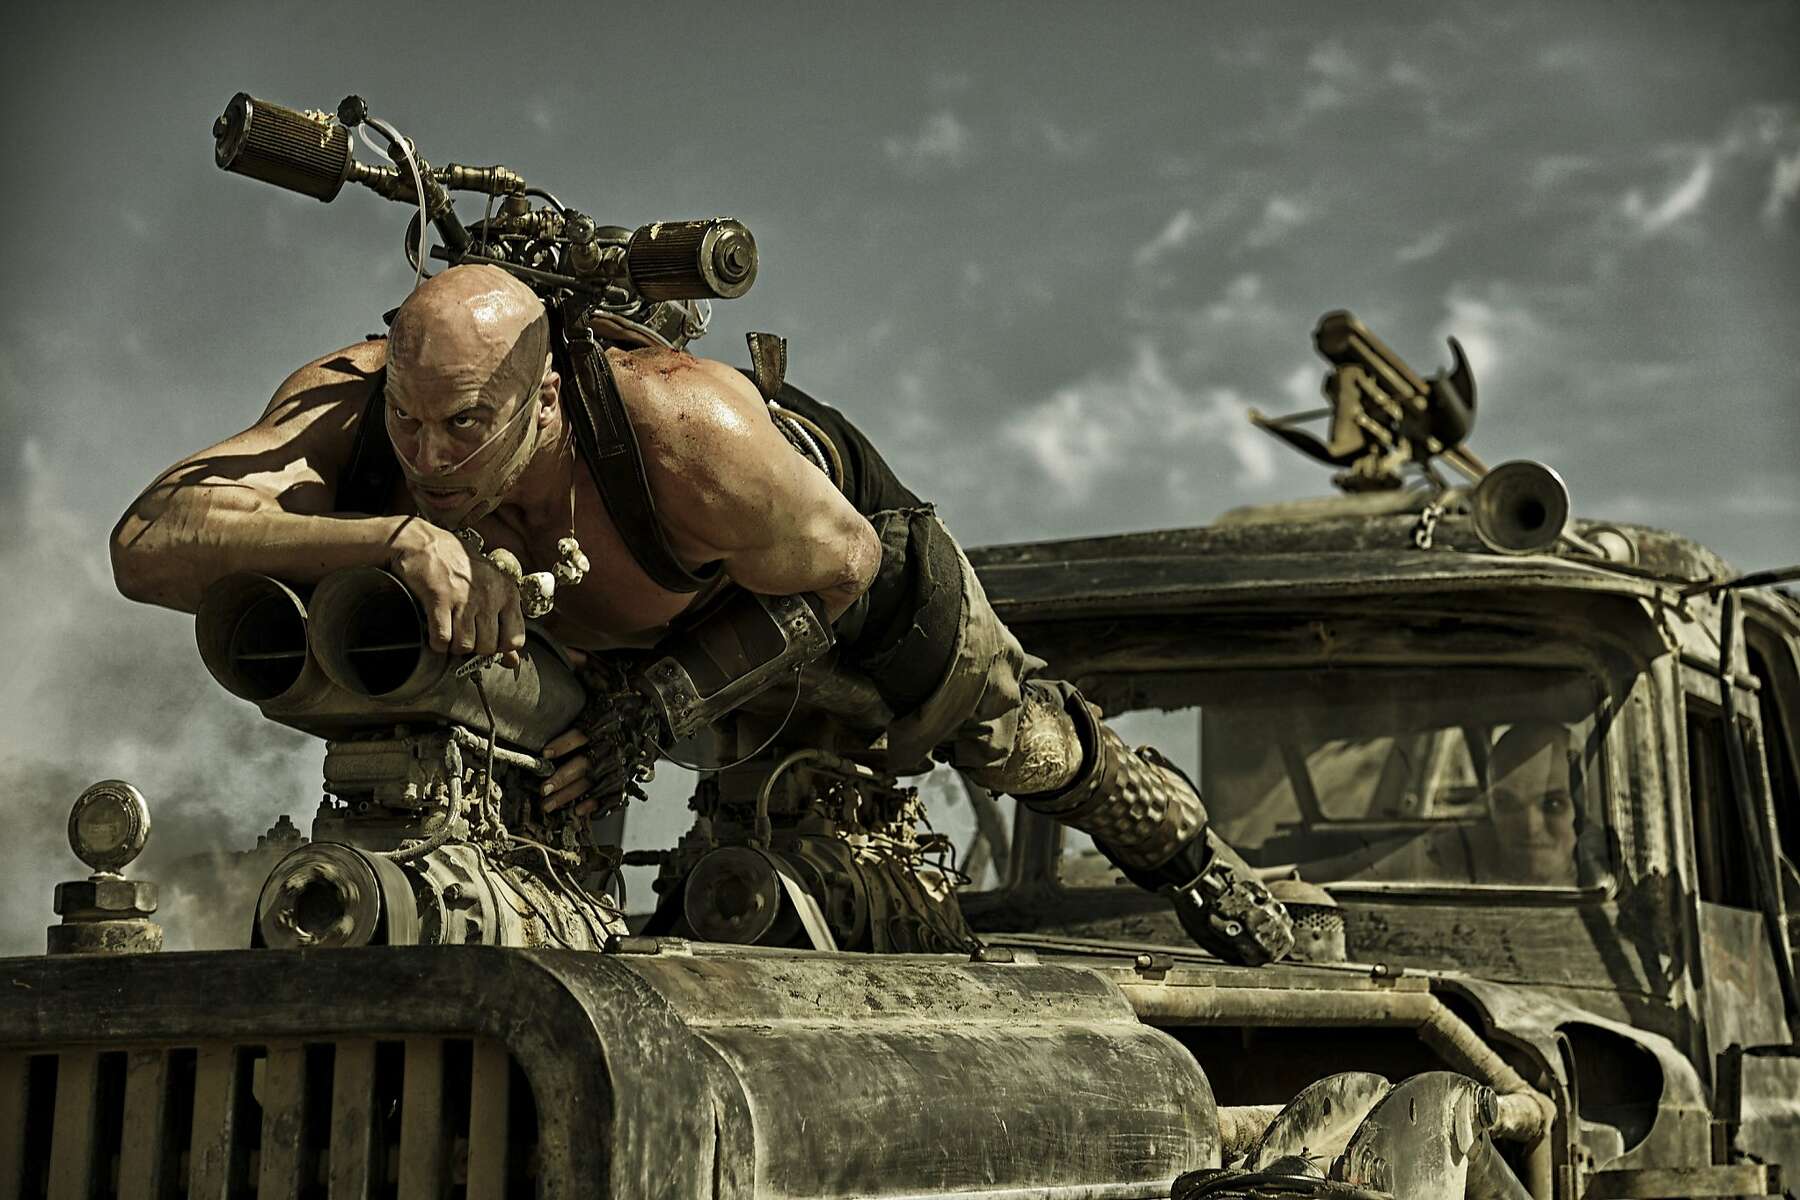 mad max fury road free online streaming 2015